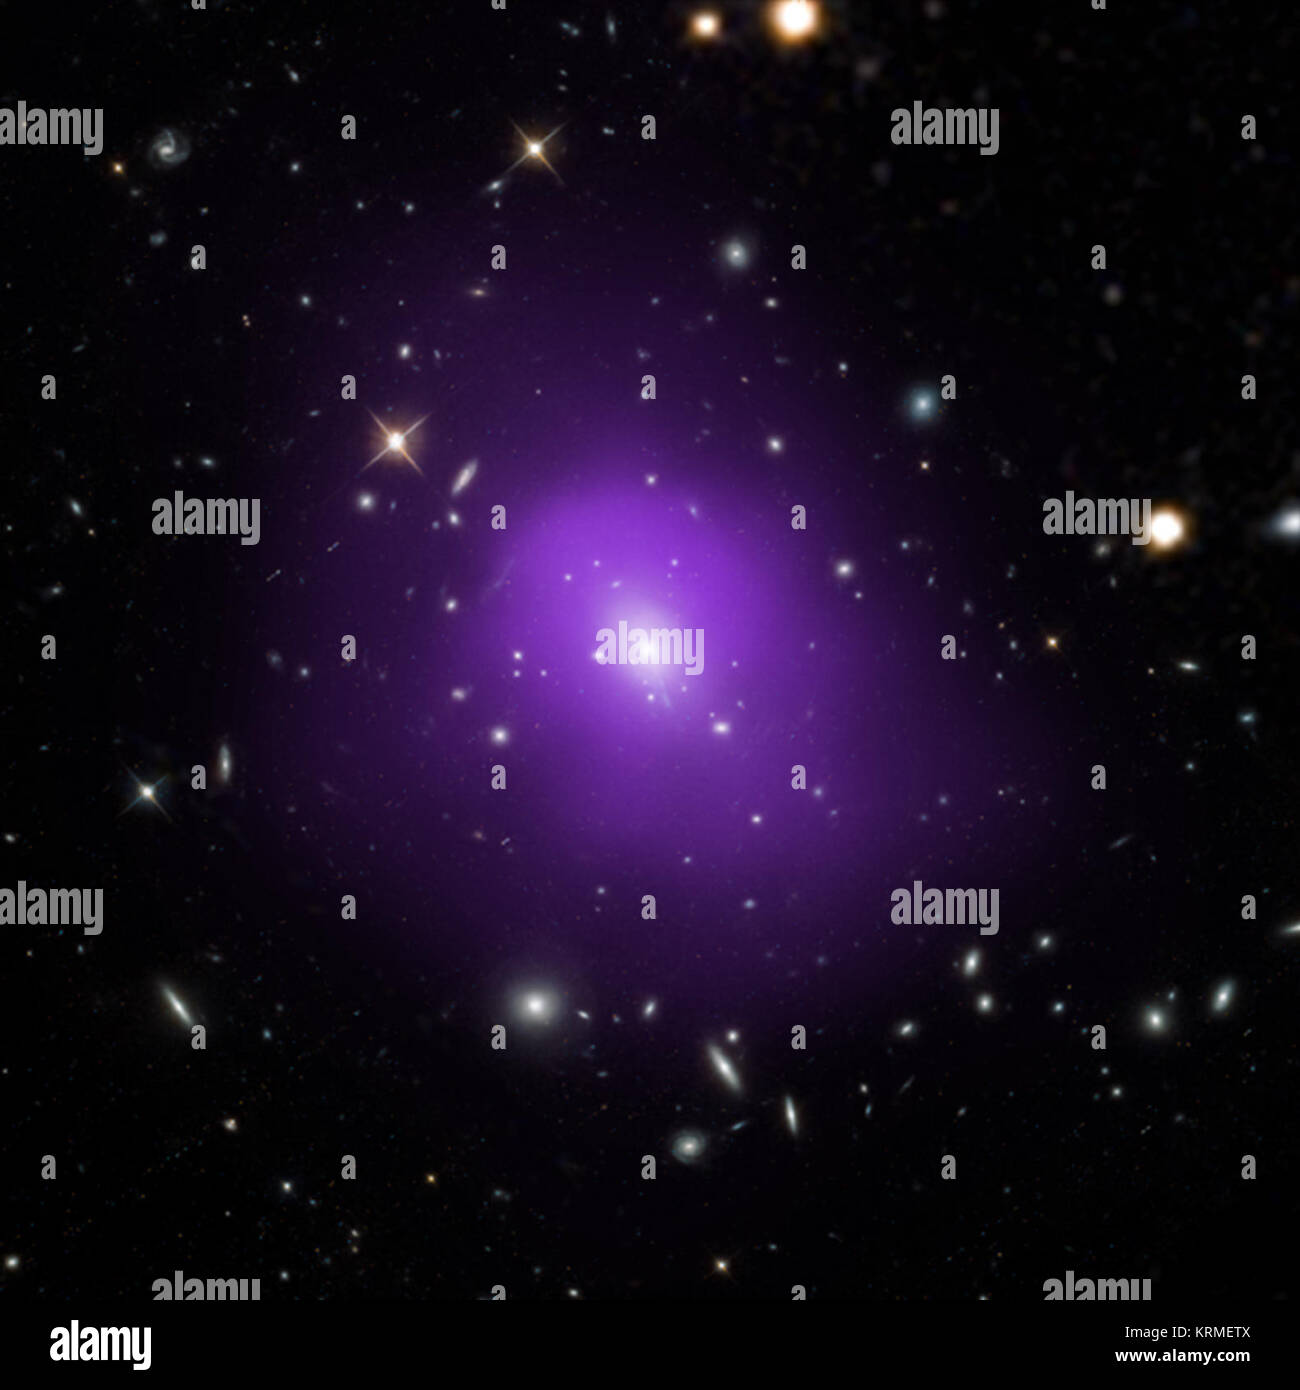 These four galaxy clusters were part of a large survey of over 300 clusters used to investigate dark energy, the mysterious energy that is currently driving the accelerating expansion of the Universe. In these composite images, X-rays from Chandra (purple) have been combined with optical light from Hubble and Sloan Digital Sky Survey (red, green, and blue). Researchers used a novel technique that takes advantage of the observation that the outer reaches of galaxy clusters, the largest structures in the universe held together by gravity, show similarity in their X-ray emission profiles and size Stock Photo